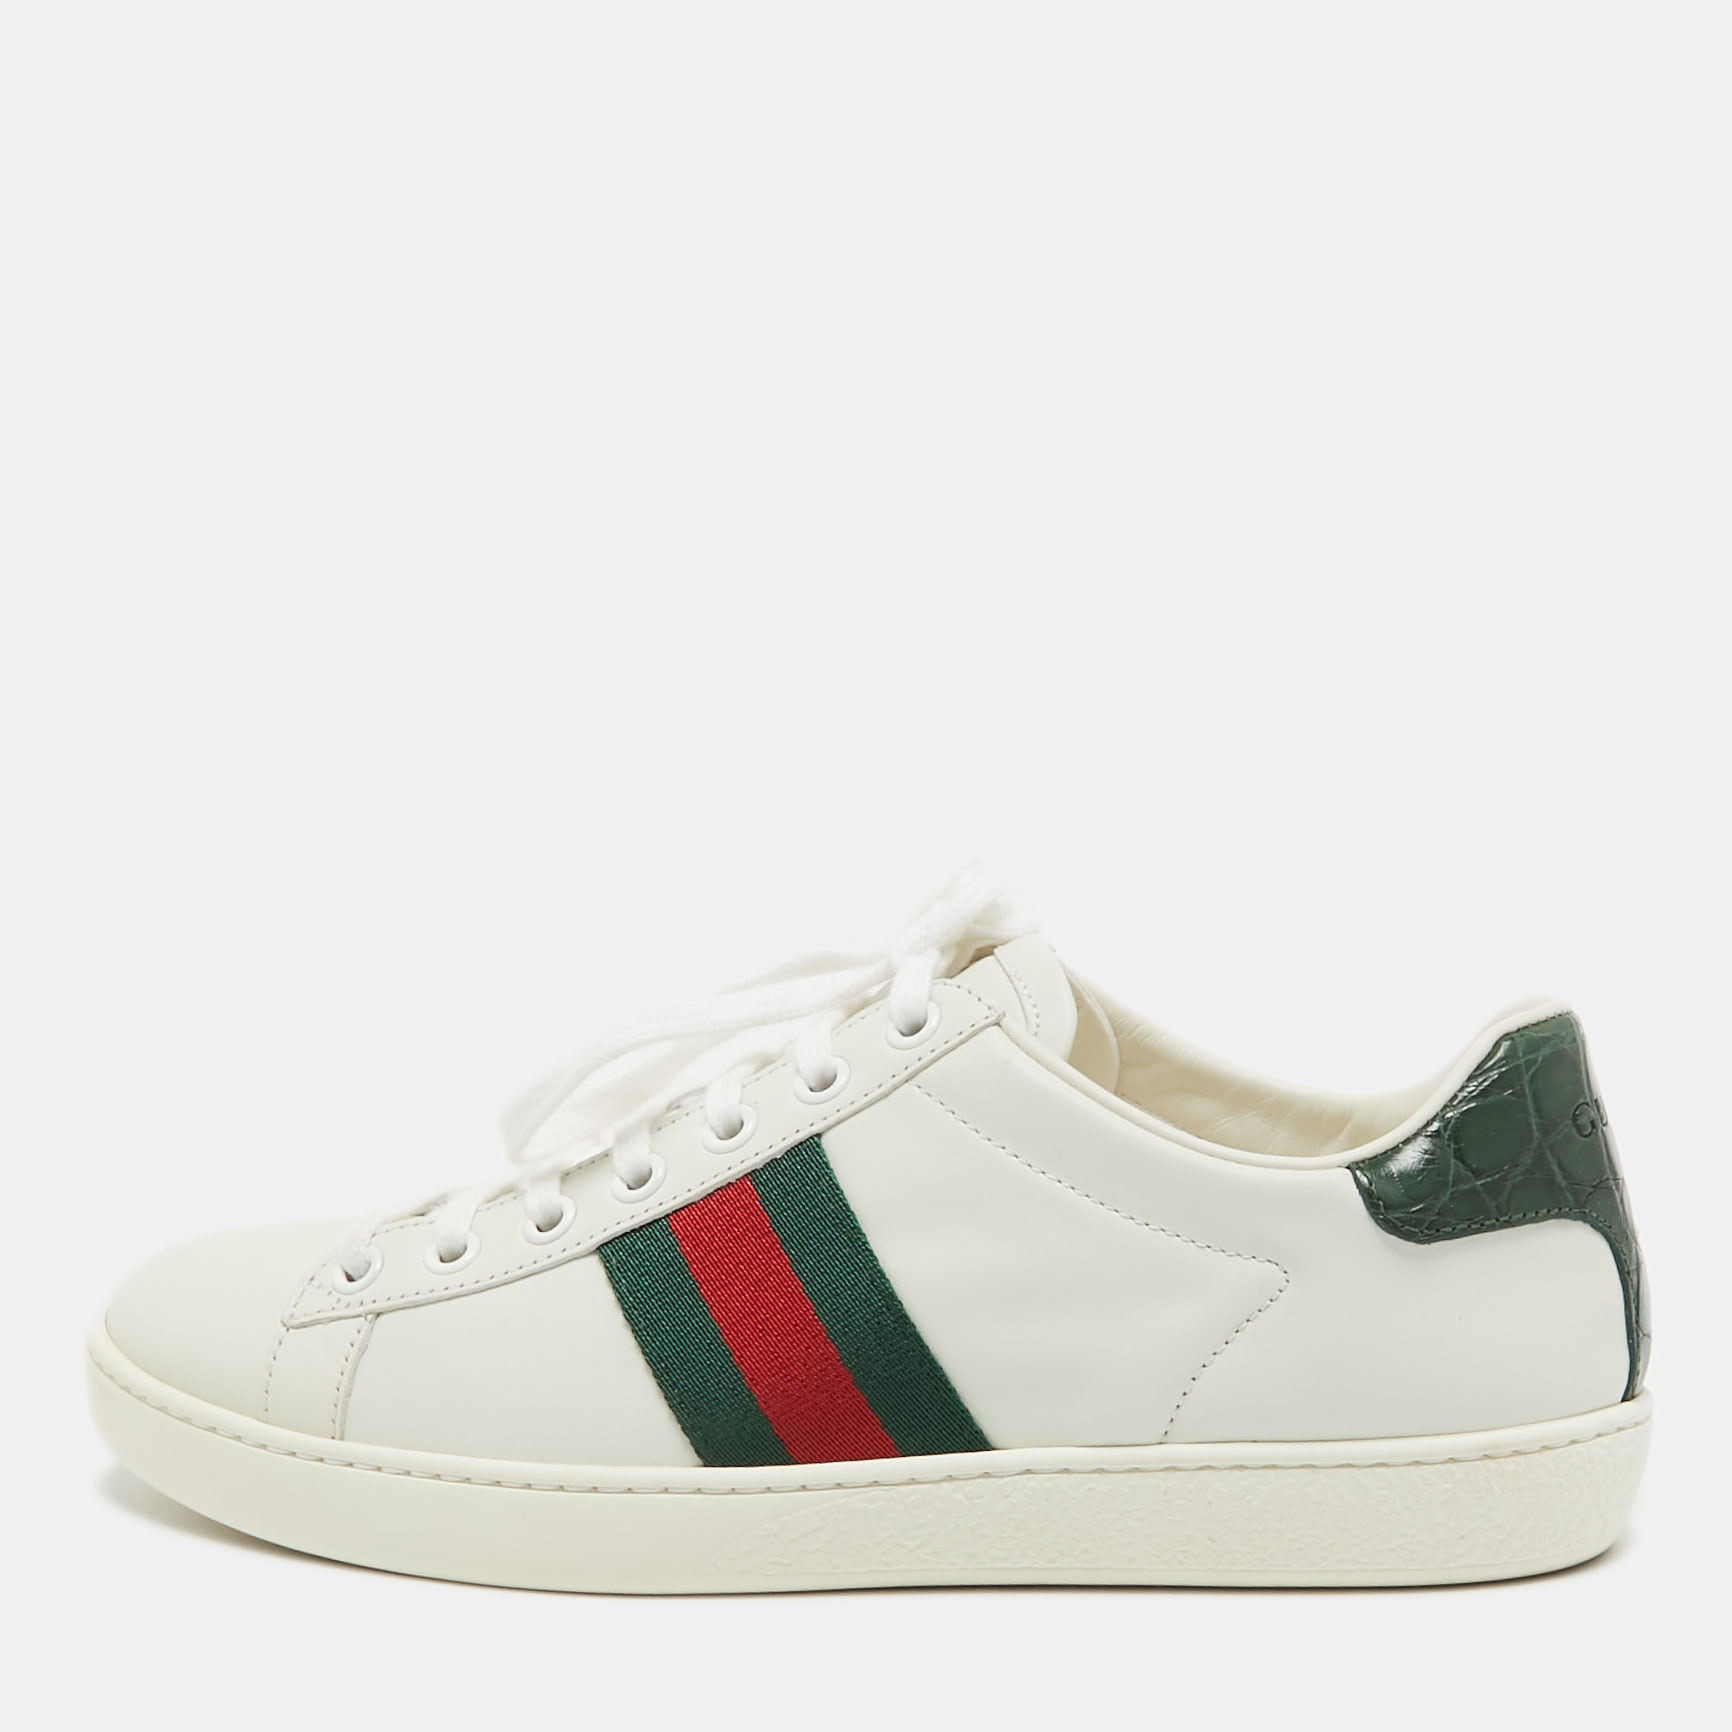 Gucci White Leather Accent Web Low Top Sneakers Size 36.5